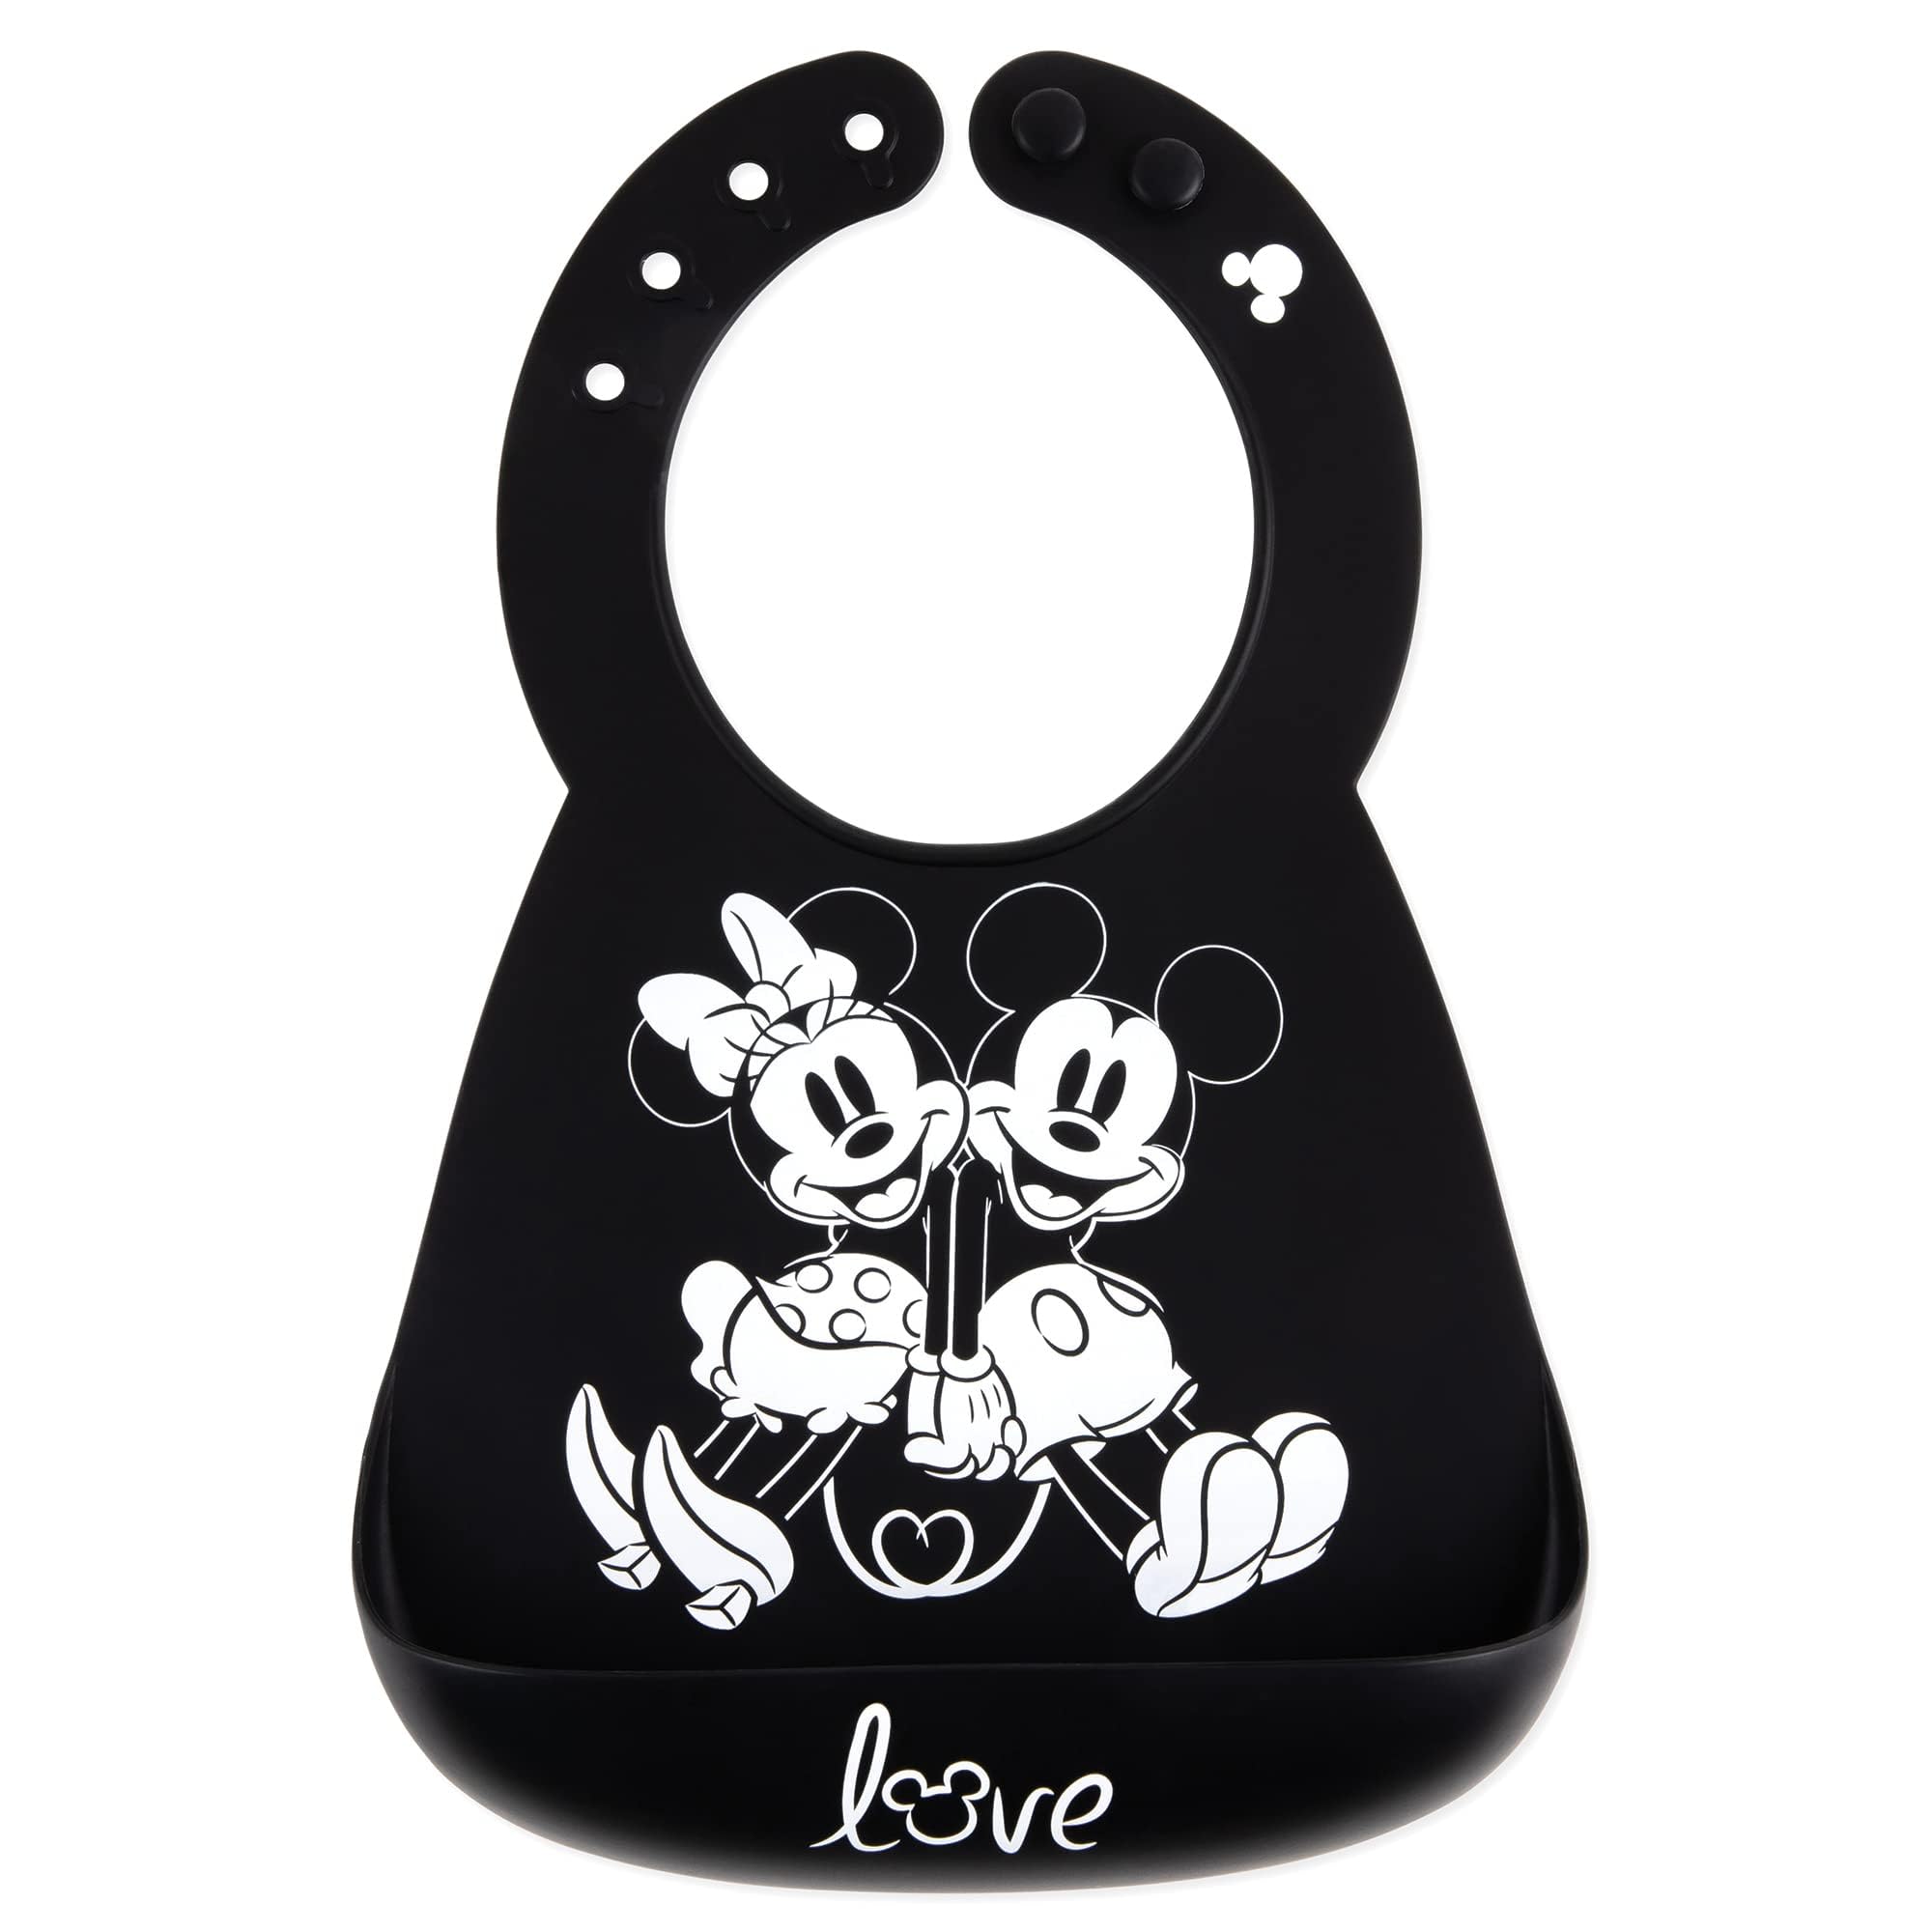 Bumkins Bibs, Silicone Pocket for Babies, Baby Bib for Girl or Boy, for 6-24 Months Up to Toddler, Essential Must Have for Eating, Feeding, Baby Led Weaning Supplies, Mess Saving, Mickey and Minnie